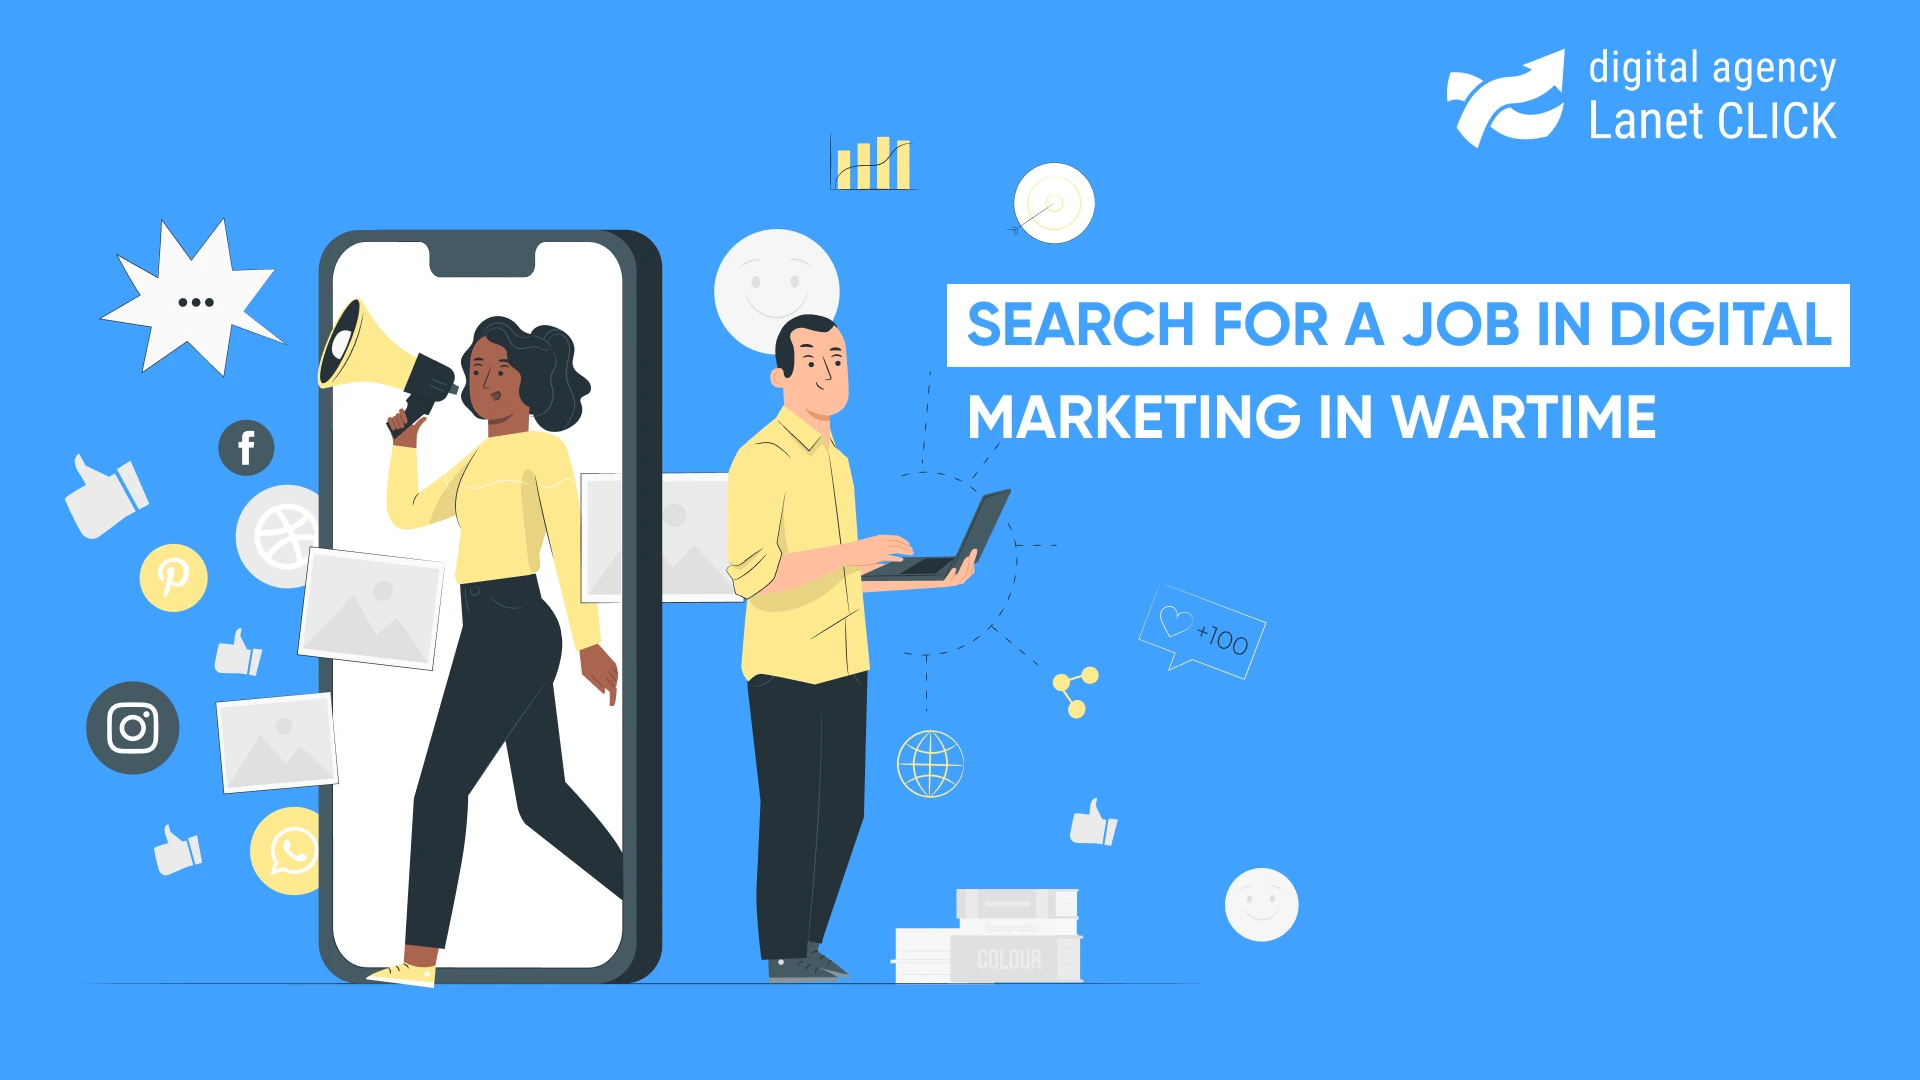 Search for a job in digital marketing in wartime